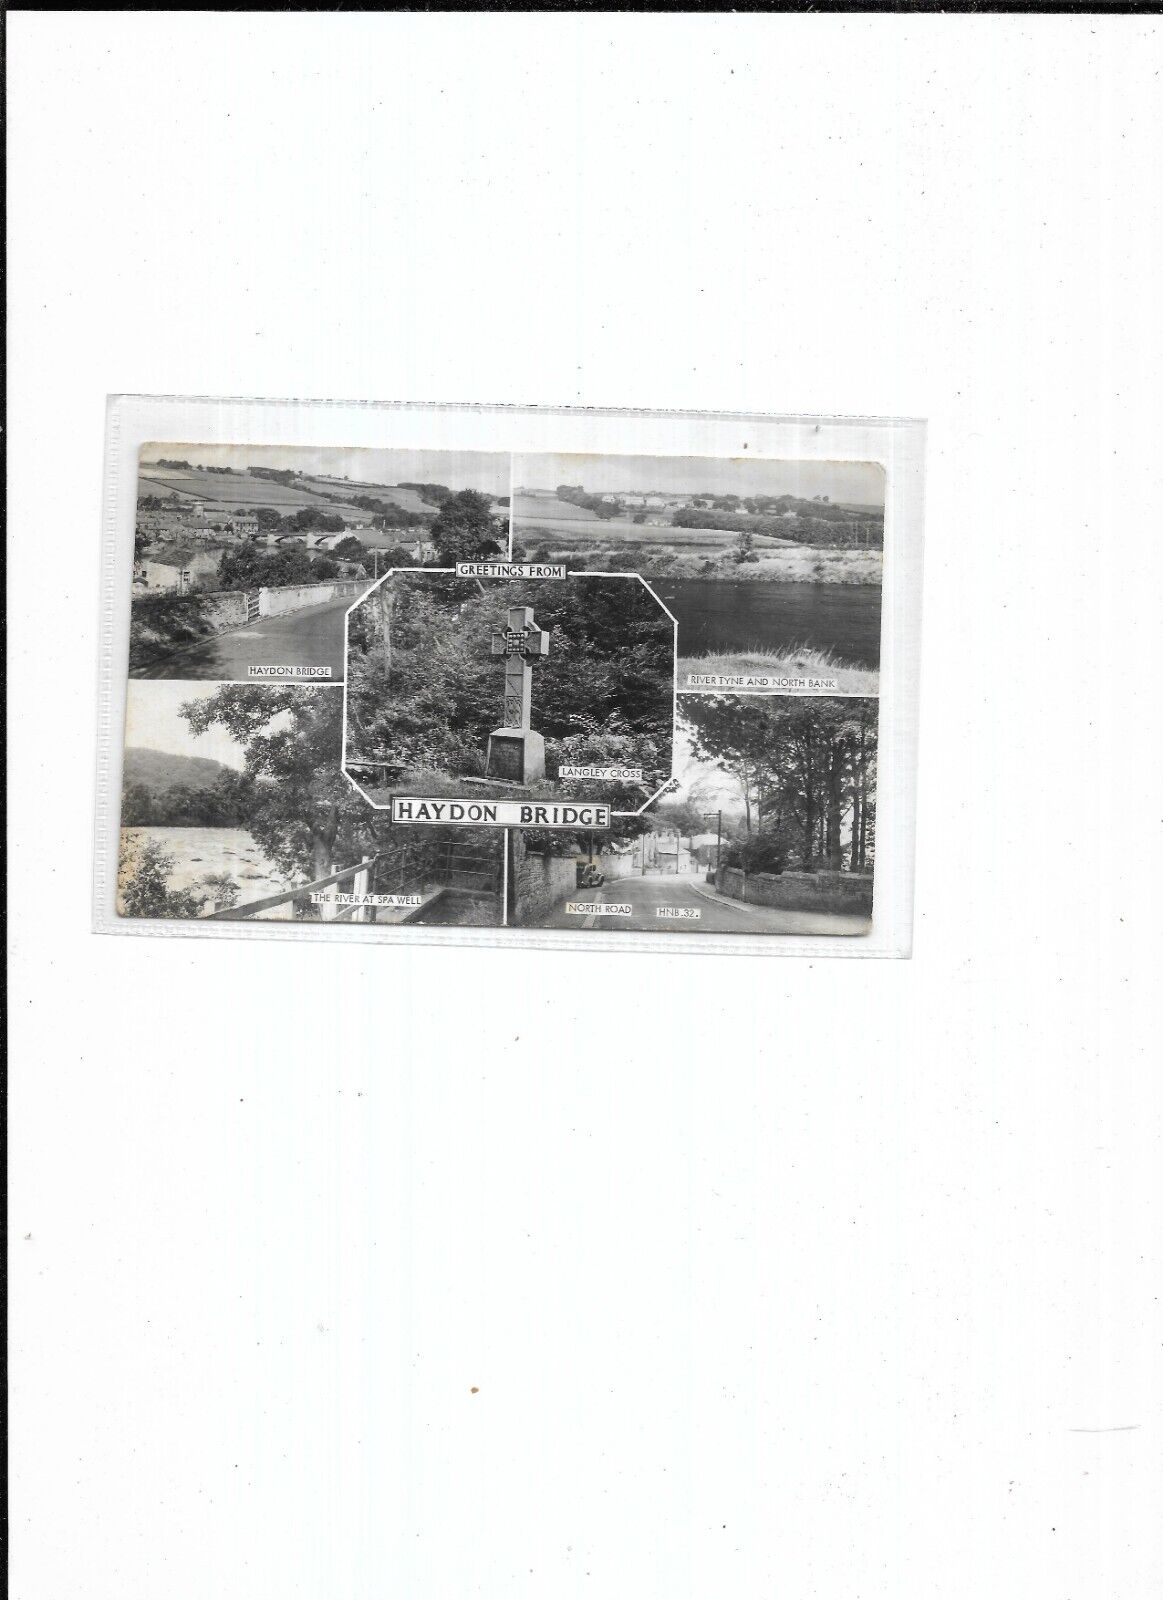 House Clearance - RP Northumberland Multiview Service "Greetings from Haydon Bridge" Undated